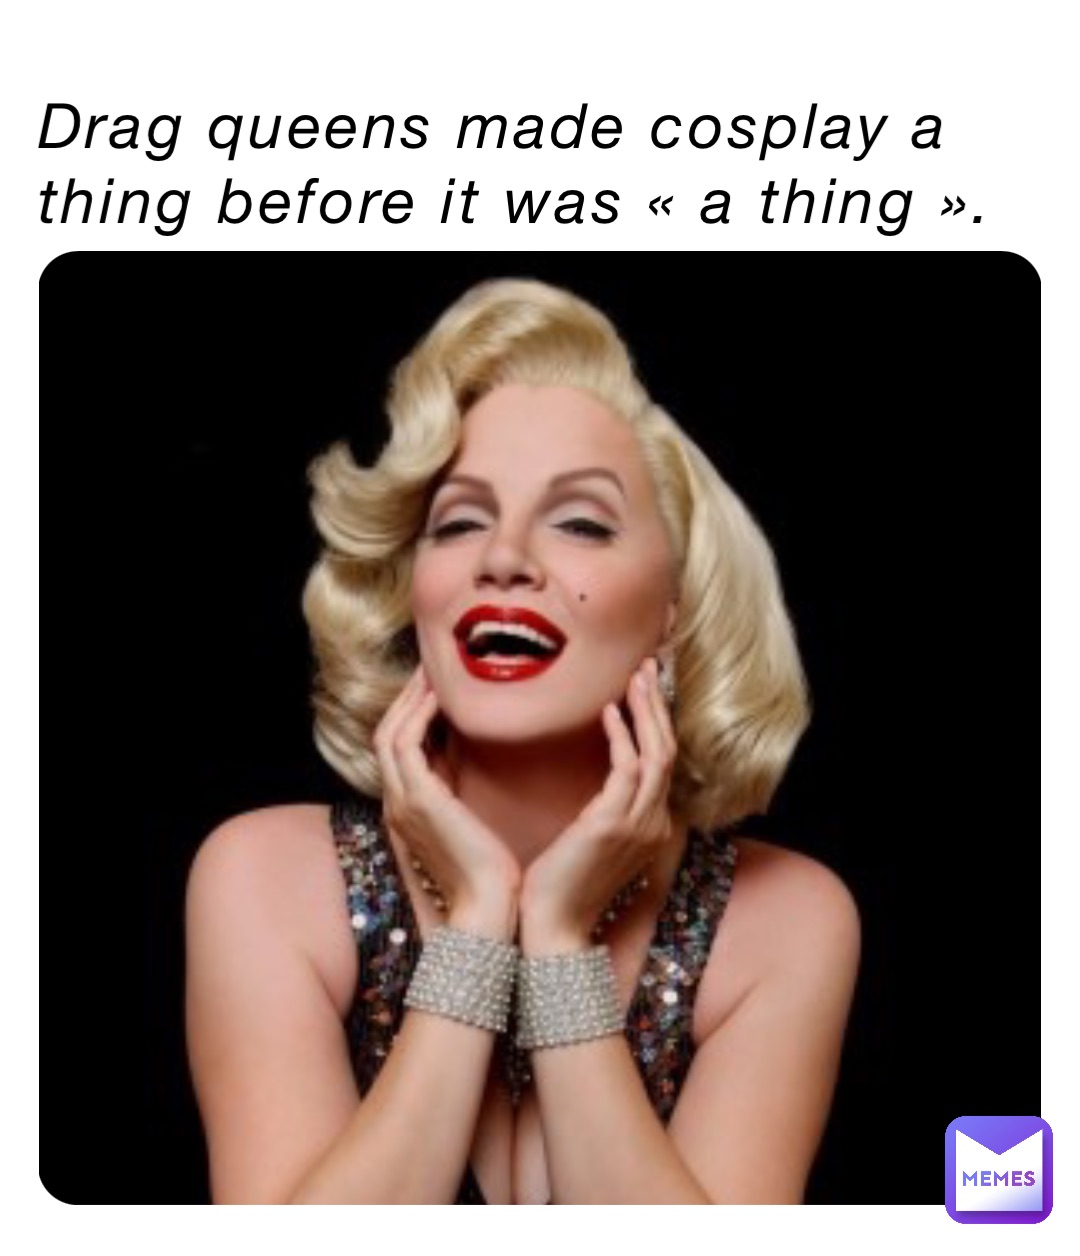 Drag queens made cosplay a thing before it was « a thing ».